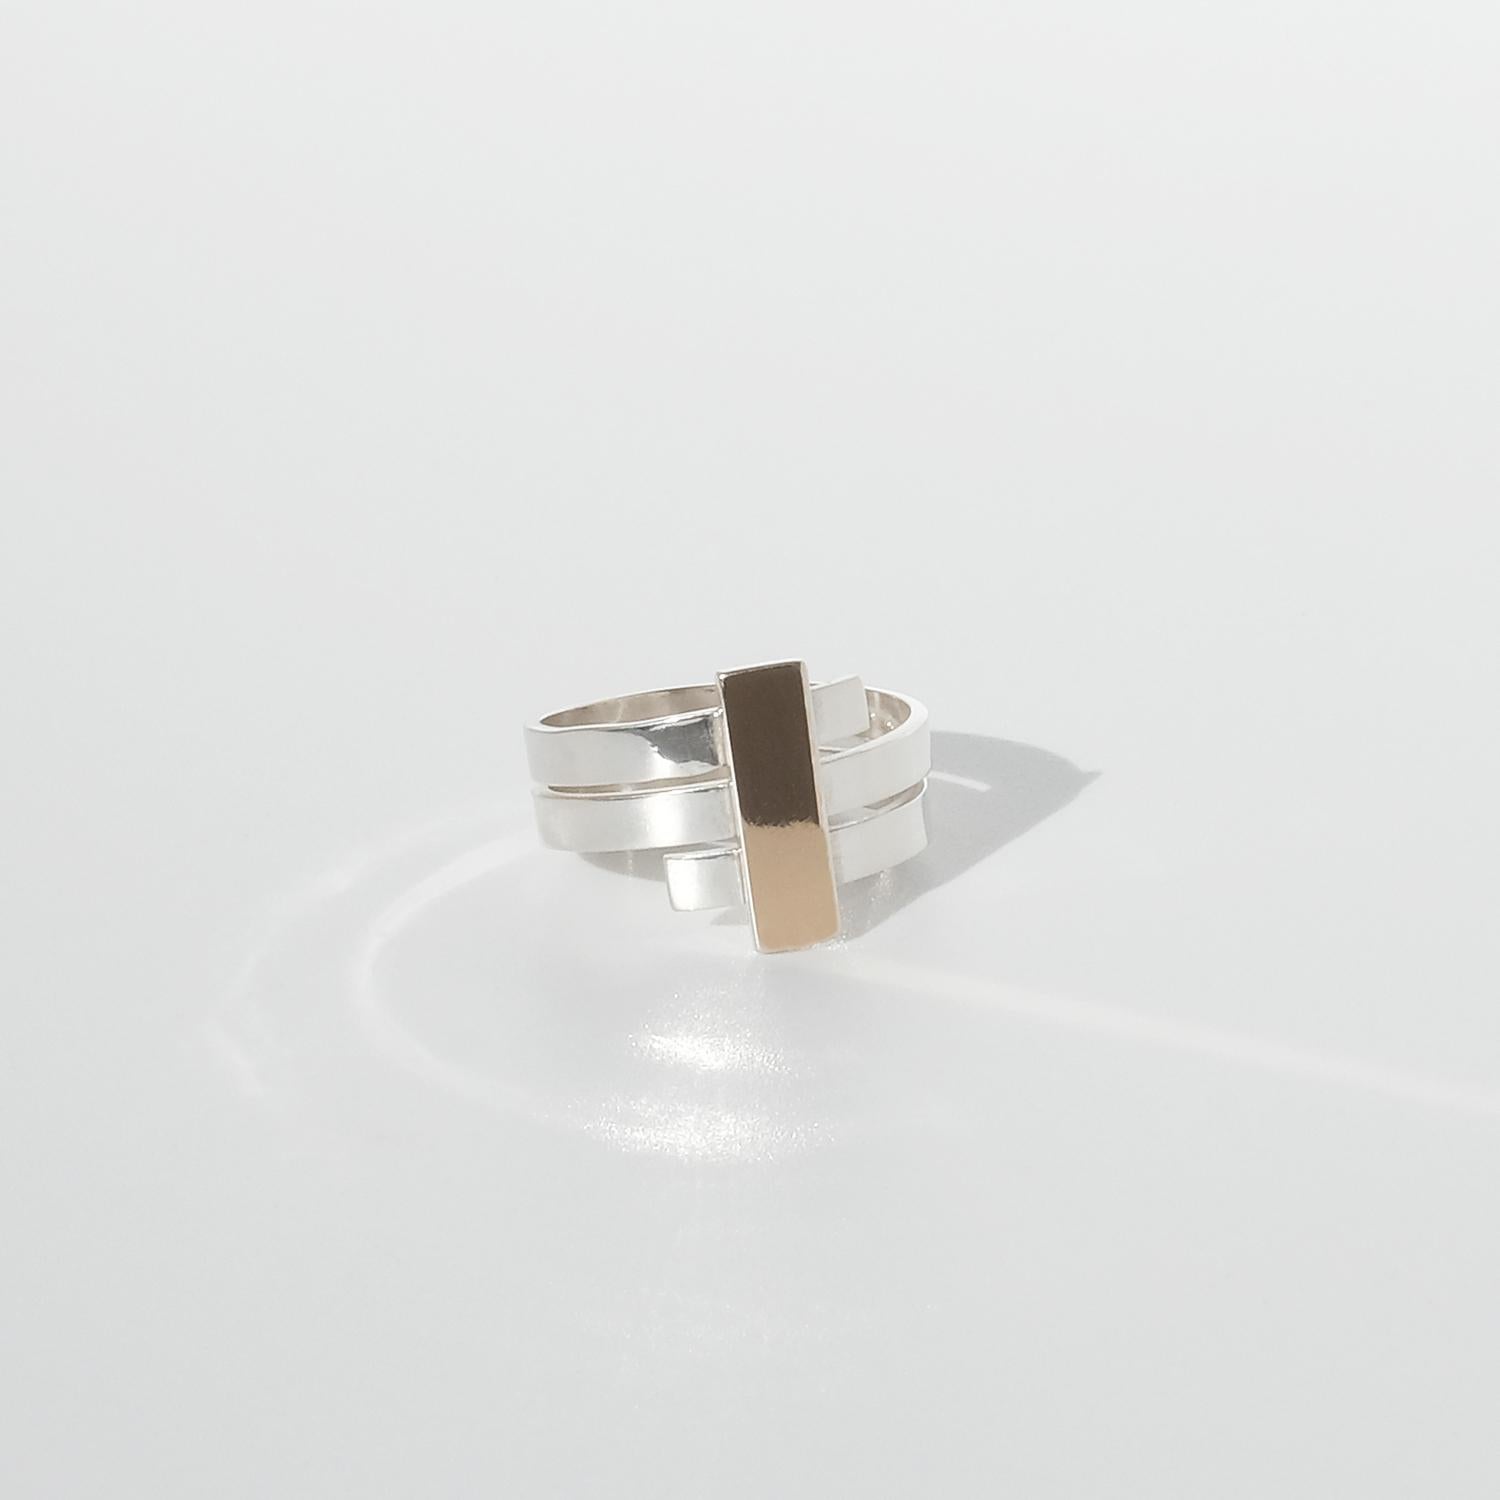 sigurd persson ring